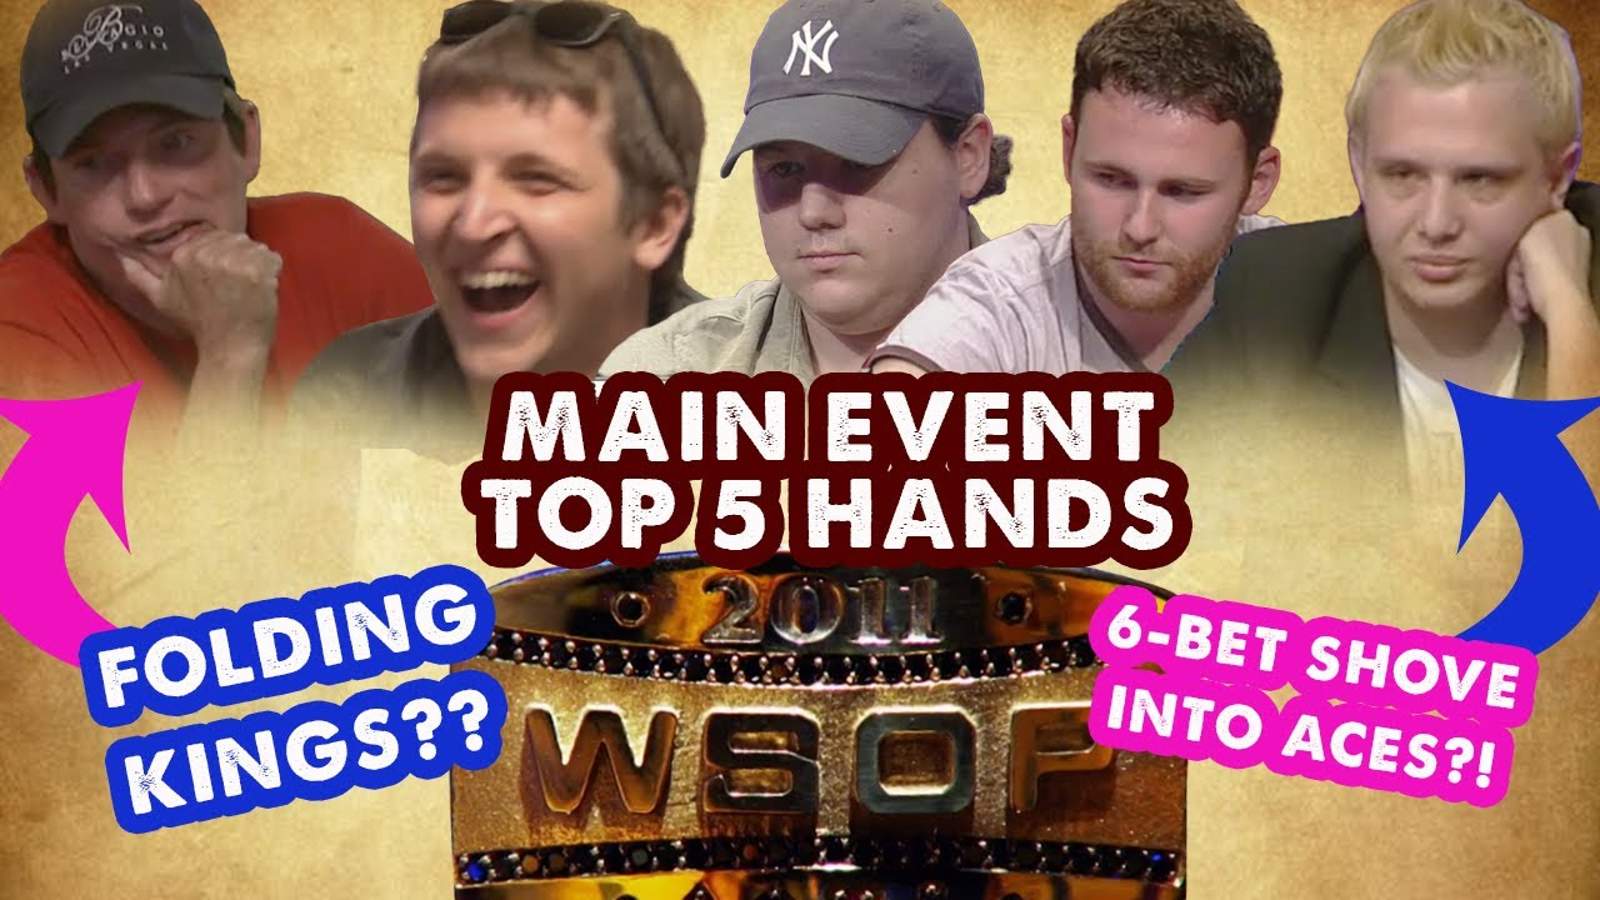 Watch the Top 5 Hands from the 2011 WSOP Main Event Now